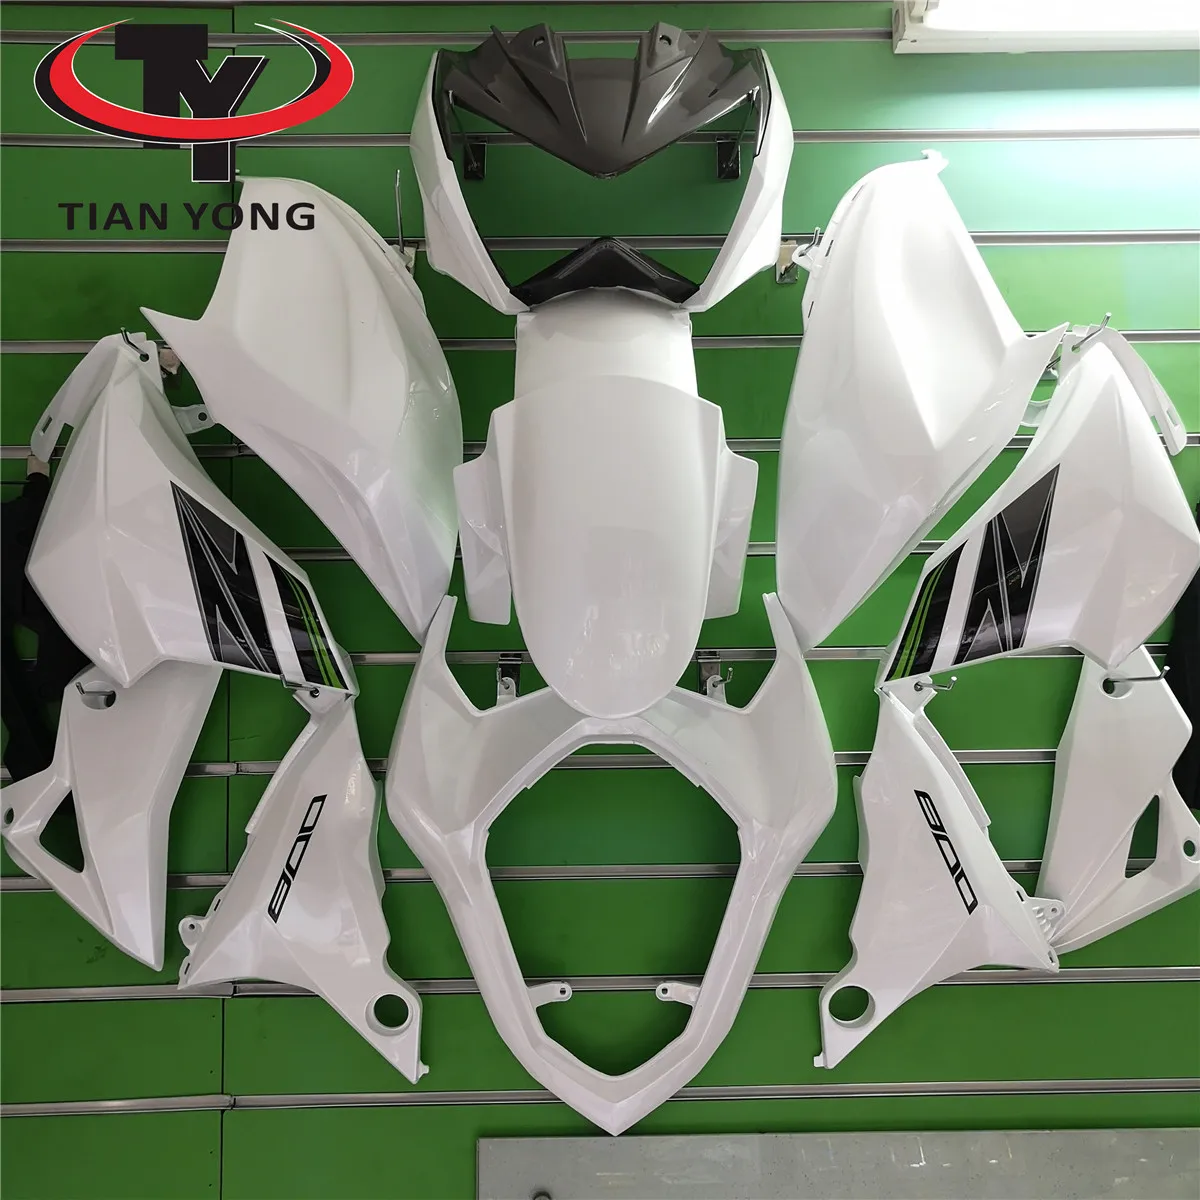 

High Quality Full Fairing Kits Bodywork For Z800 z800 2013-2014-2015 2016 6 style prints Accessories Cowling Customize